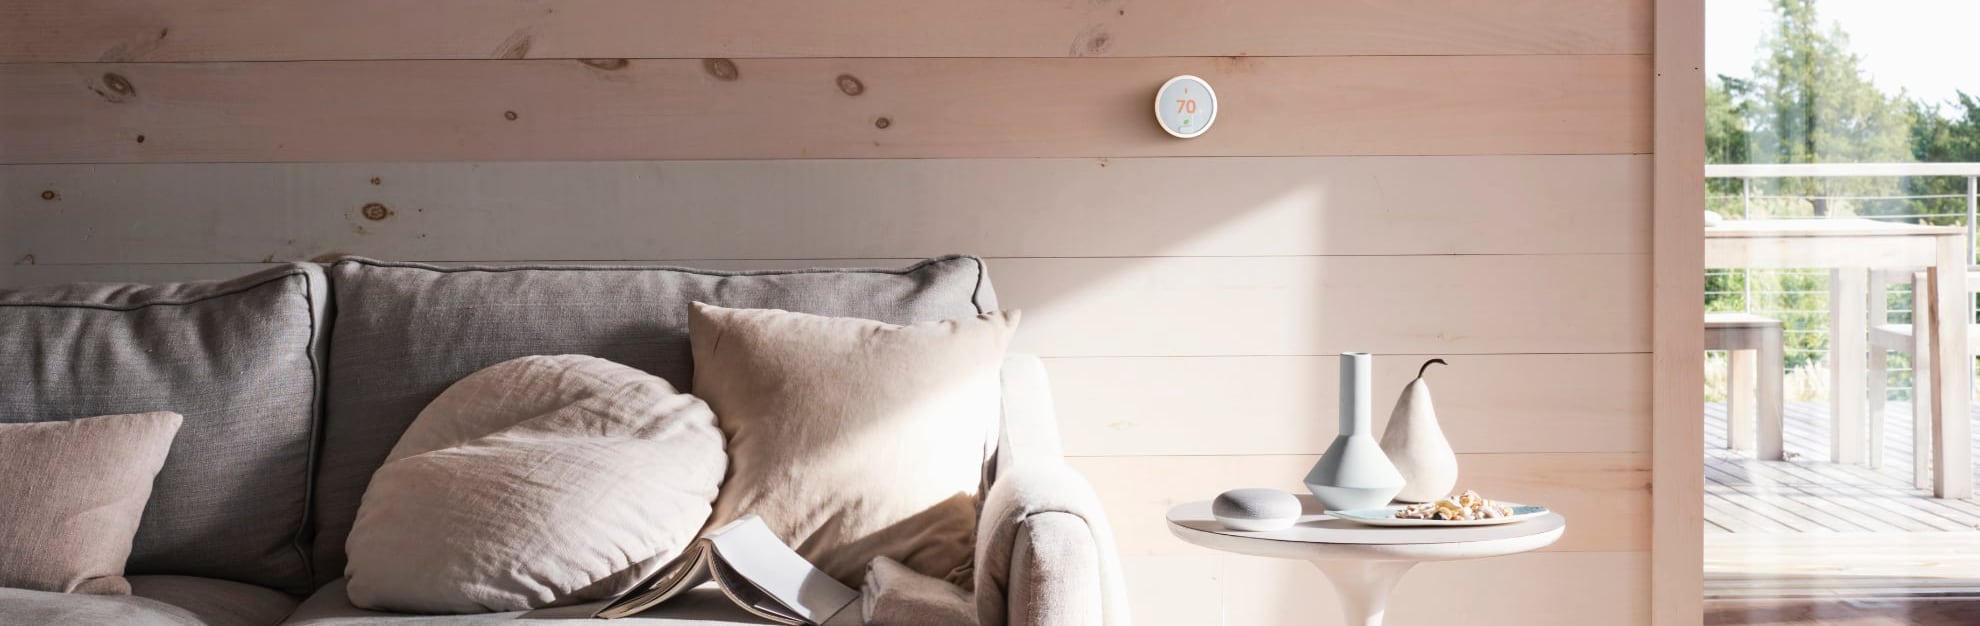 Vivint Home Automation in Wichita